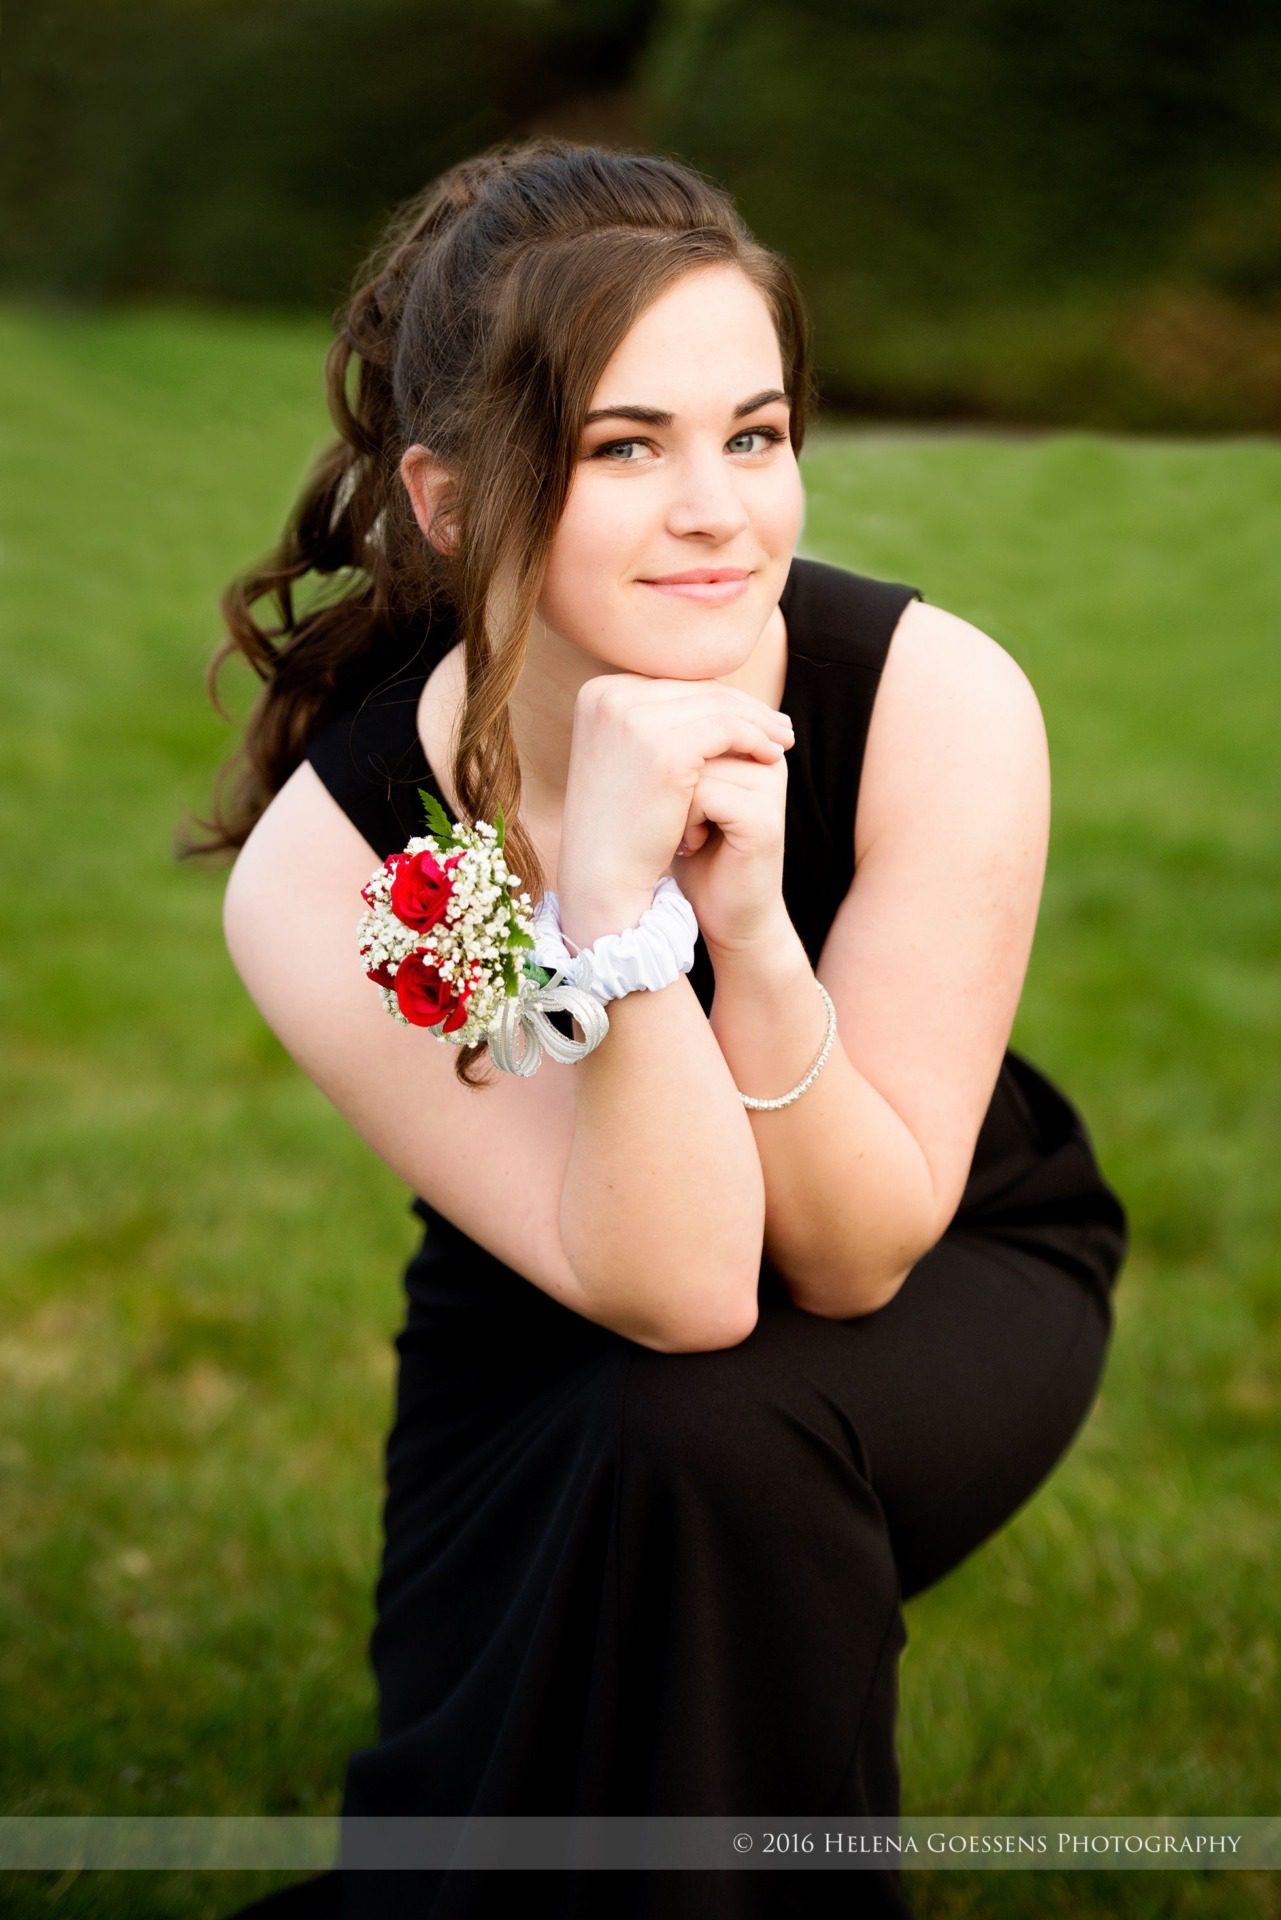 Brunette girl with green eyes and a red flowers corsage